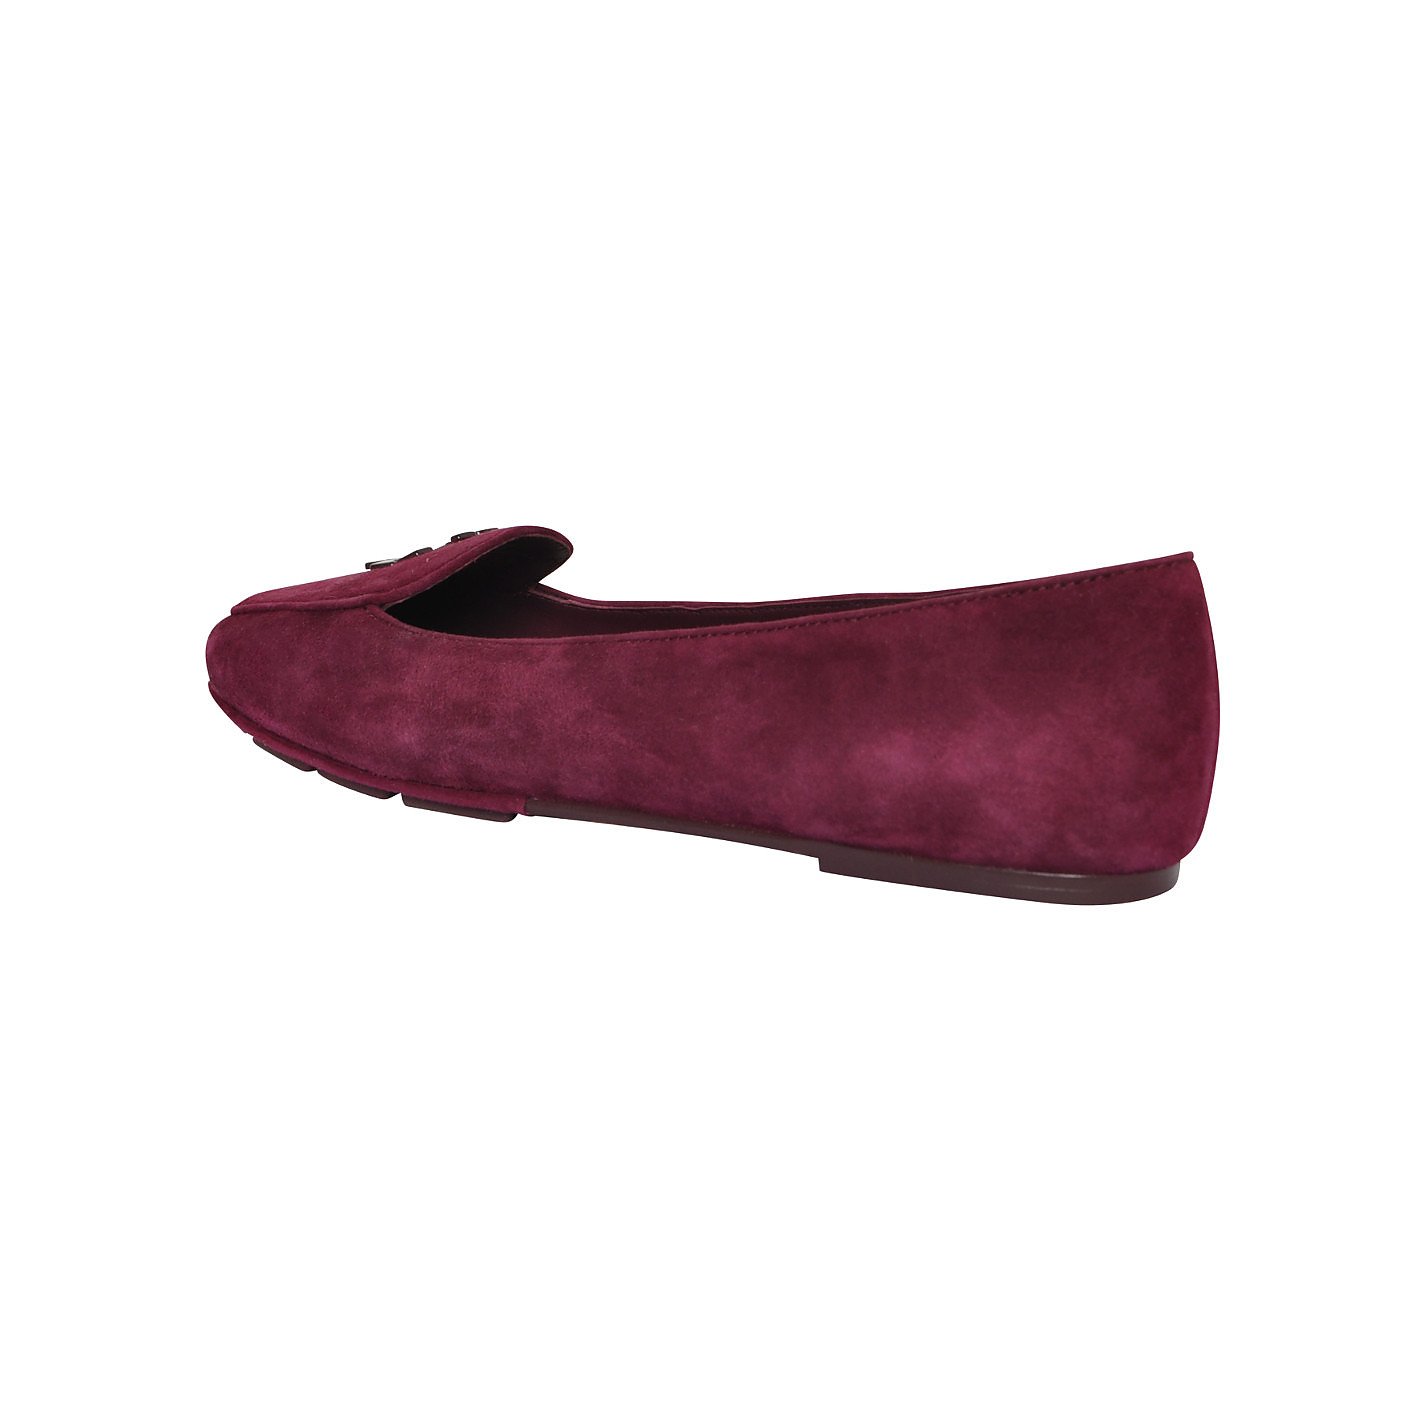 Tory Burch Suede Loafers